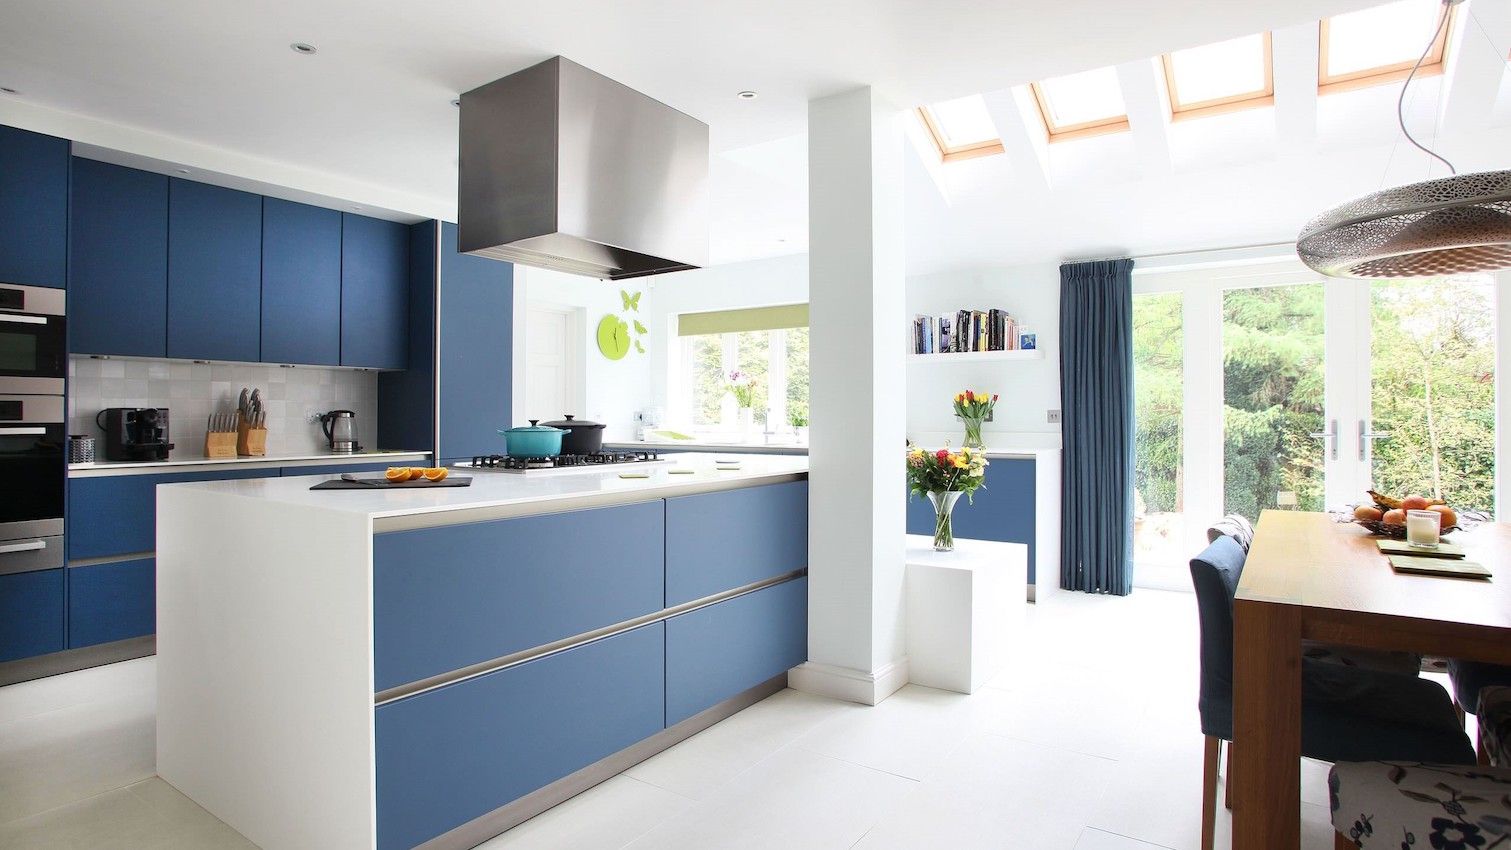 a minimalist classic blue kitchen and matching curtains will add color and chic to your space